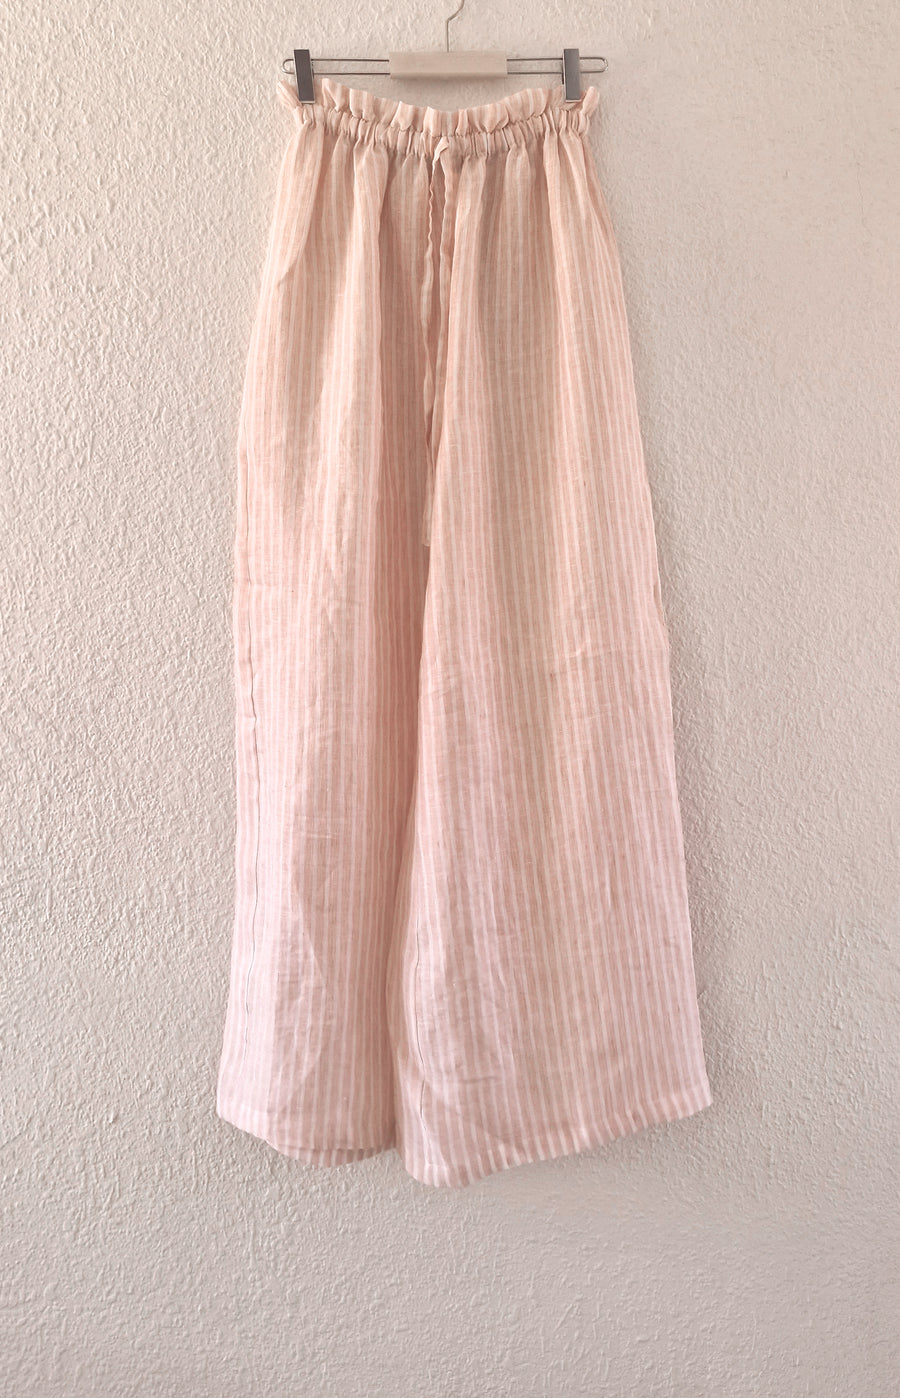 CLARAMONTE BISCUIT/WHITE STRIPED LINEN PANTS